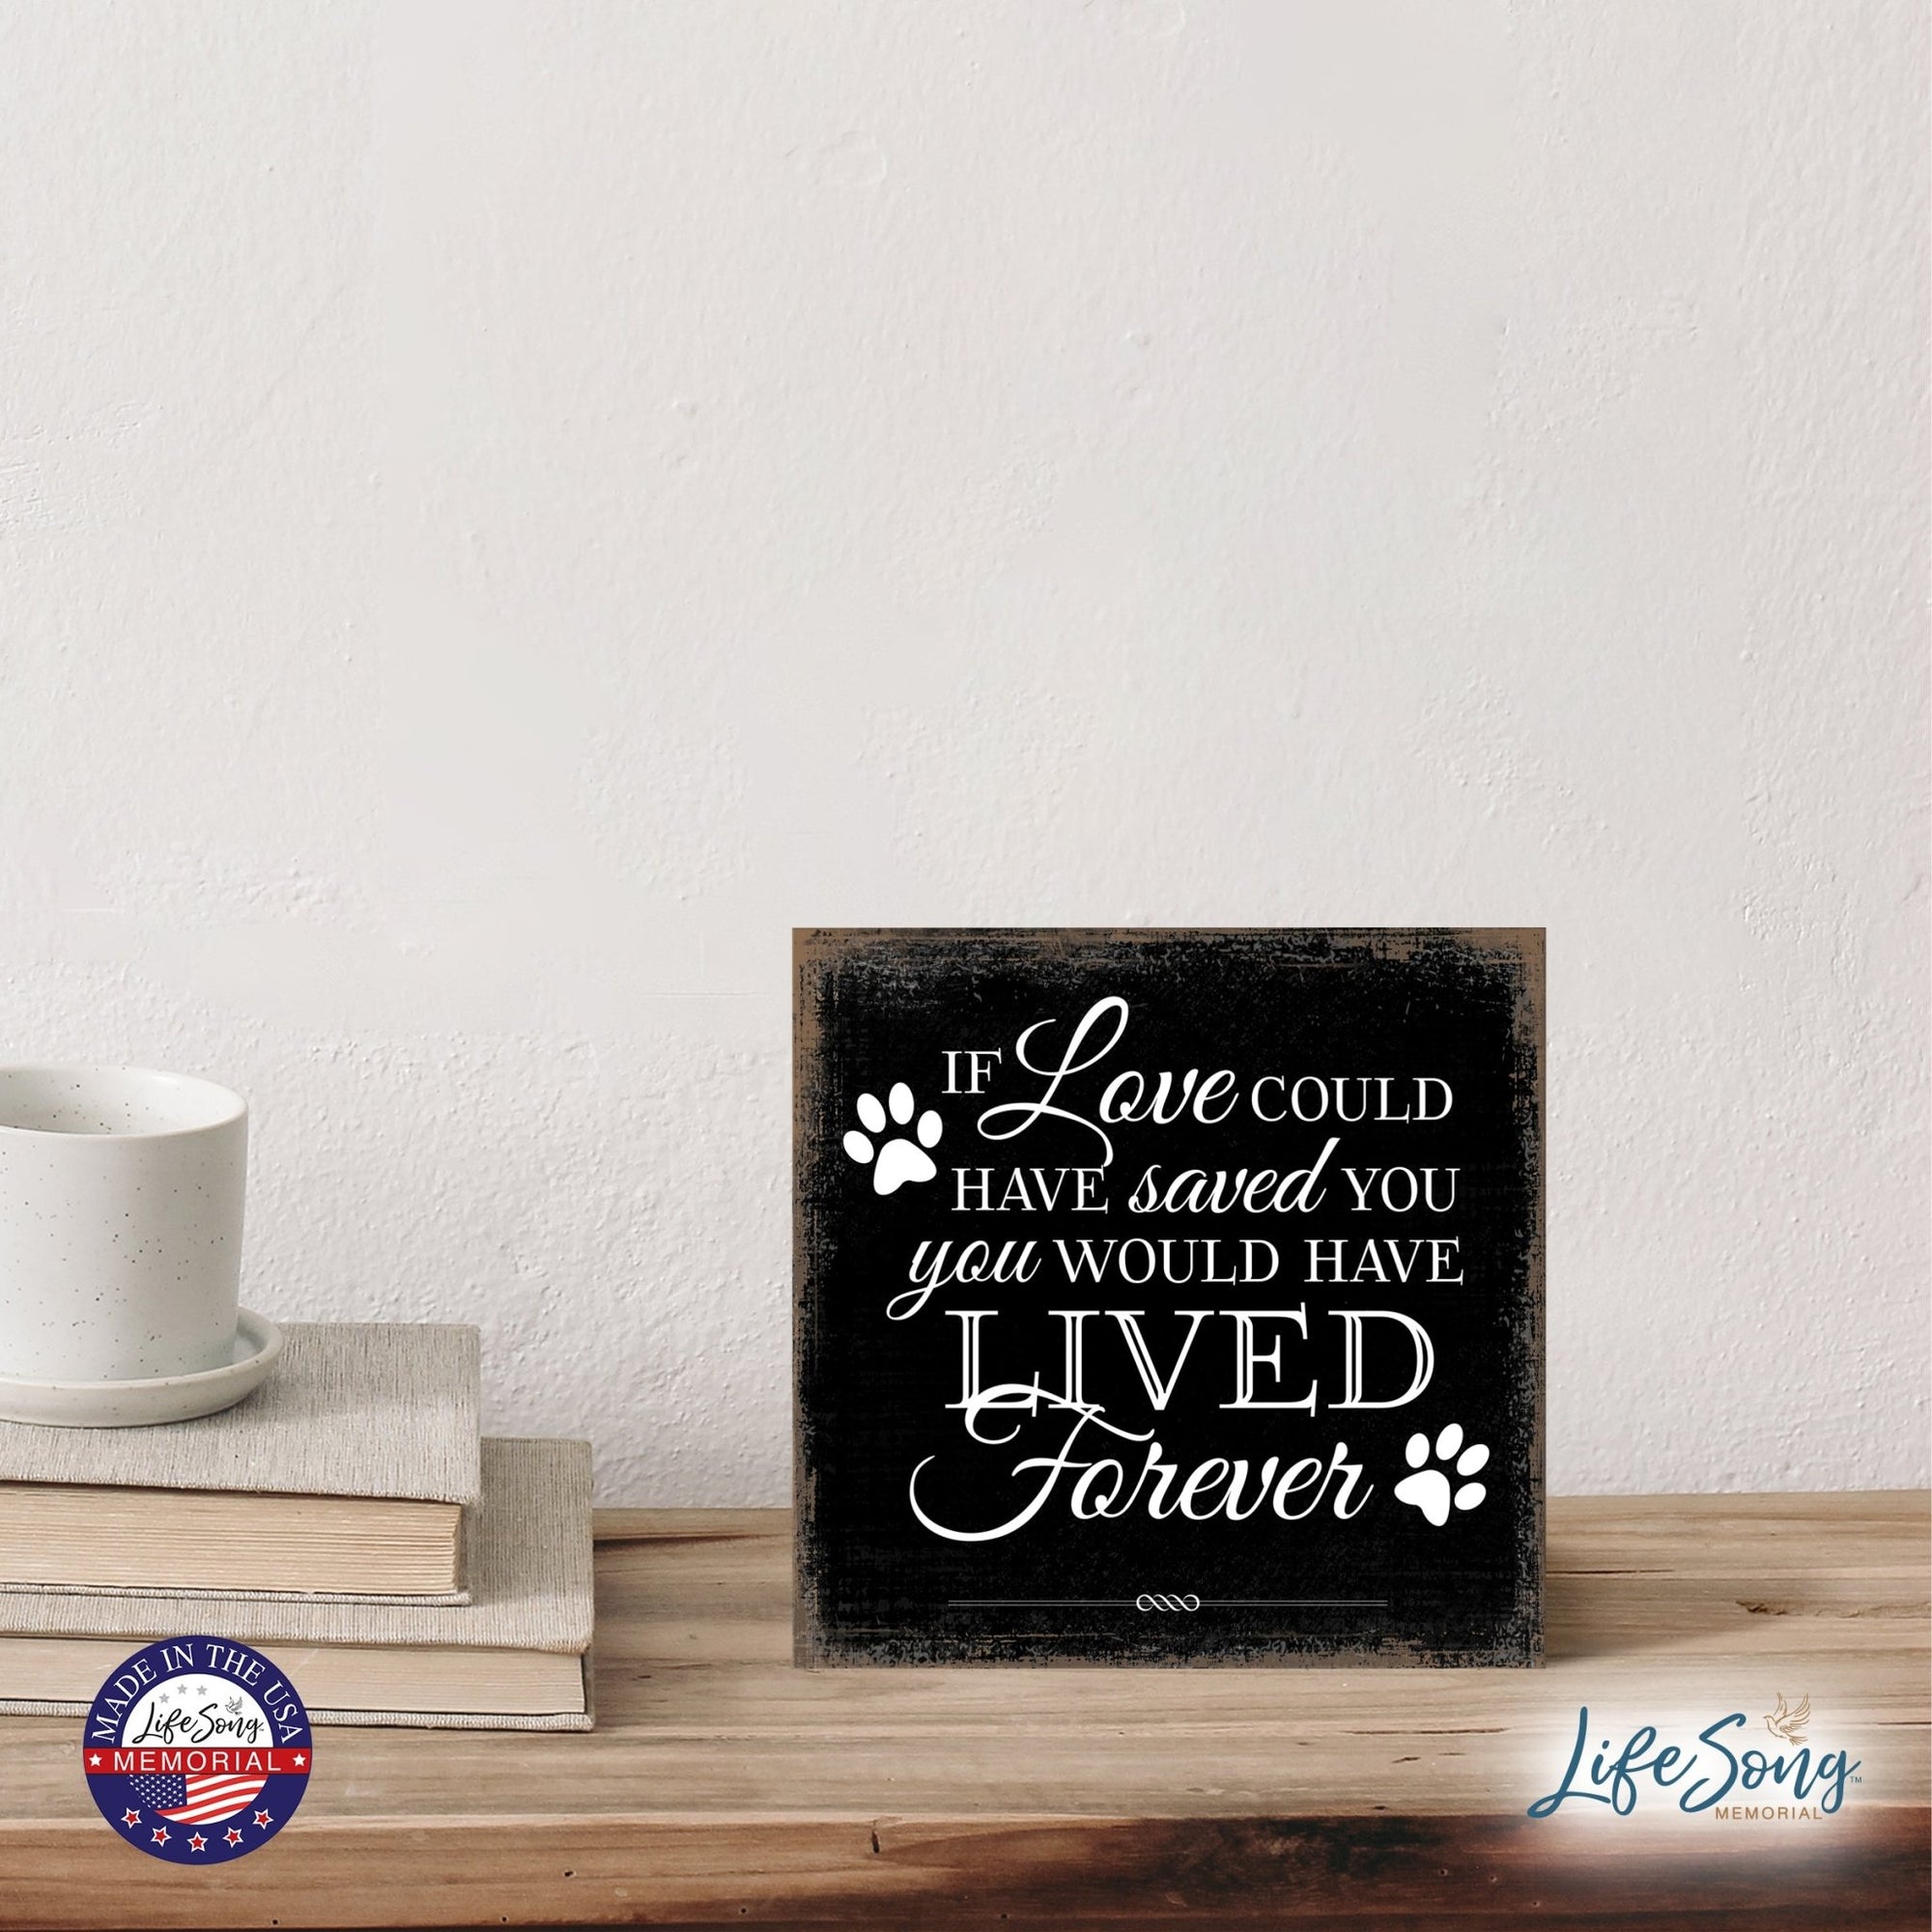 Modern Inspirational 6x6in Wooden Sign (If Love Could) Pet Memorial Plaque Tabletop and shelf decor Family Home Decoration - LifeSong Milestones